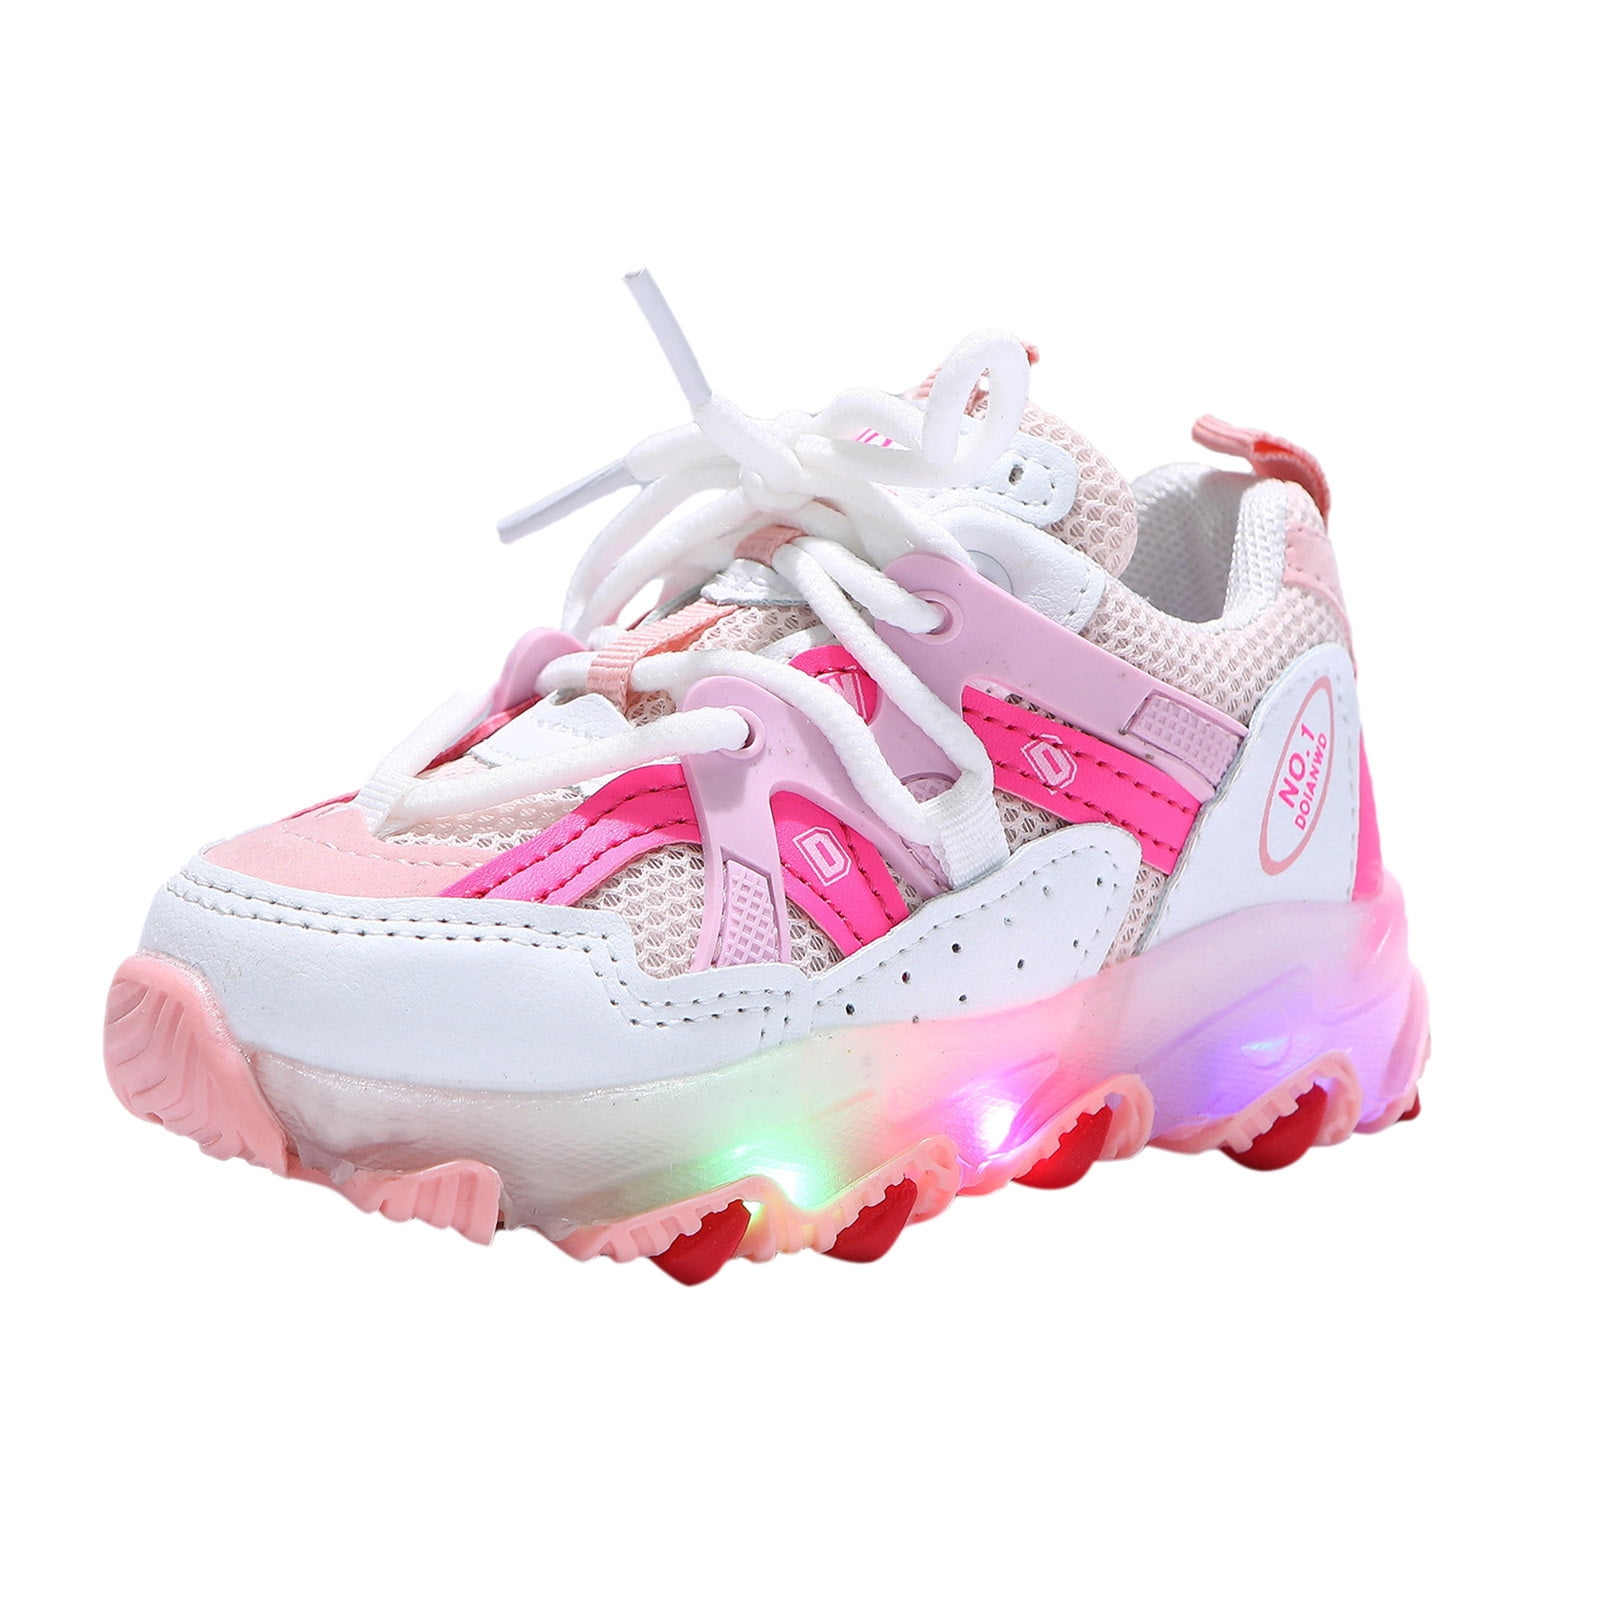 Kids LED Light Up Shoes Luminous Walking Shoes Jelly Soft Sole Sneakers Gifts for Toddler Boys Girls 0-6 Years 